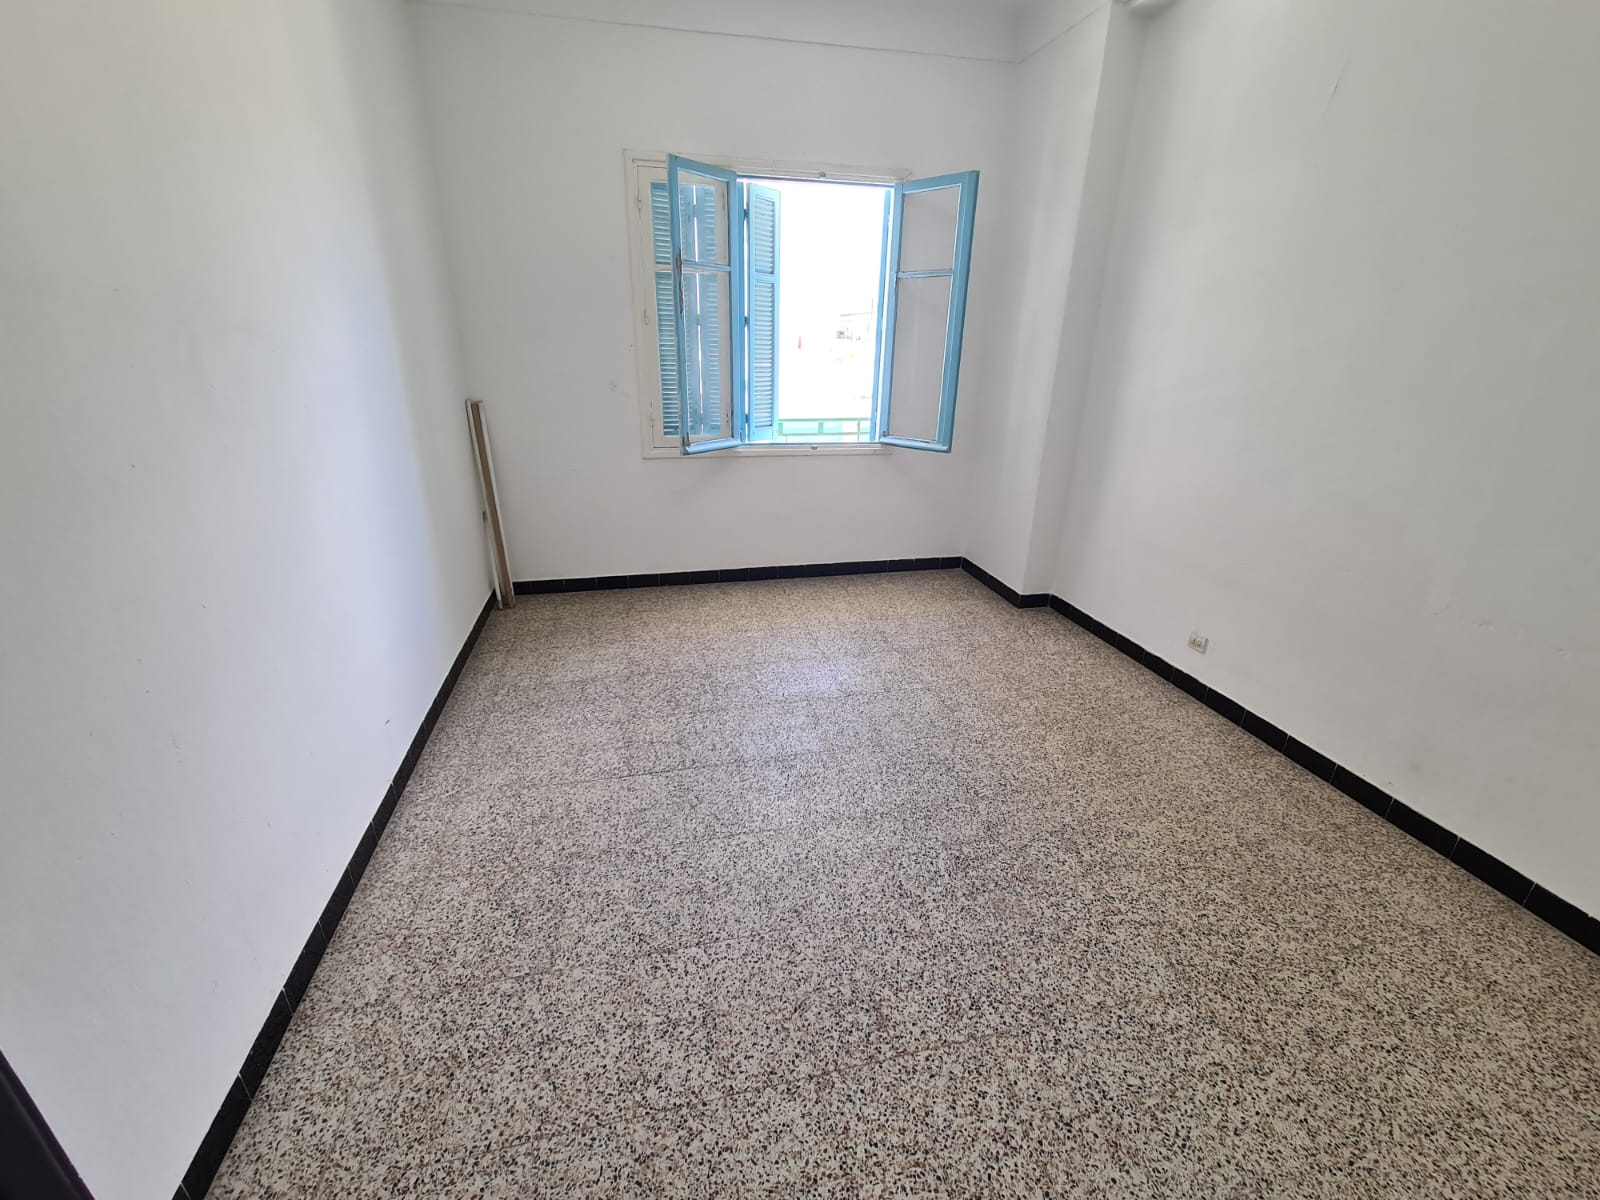 Nabeul Nabeul Vente Appart. 3 pices 65eme appartement   nabeul